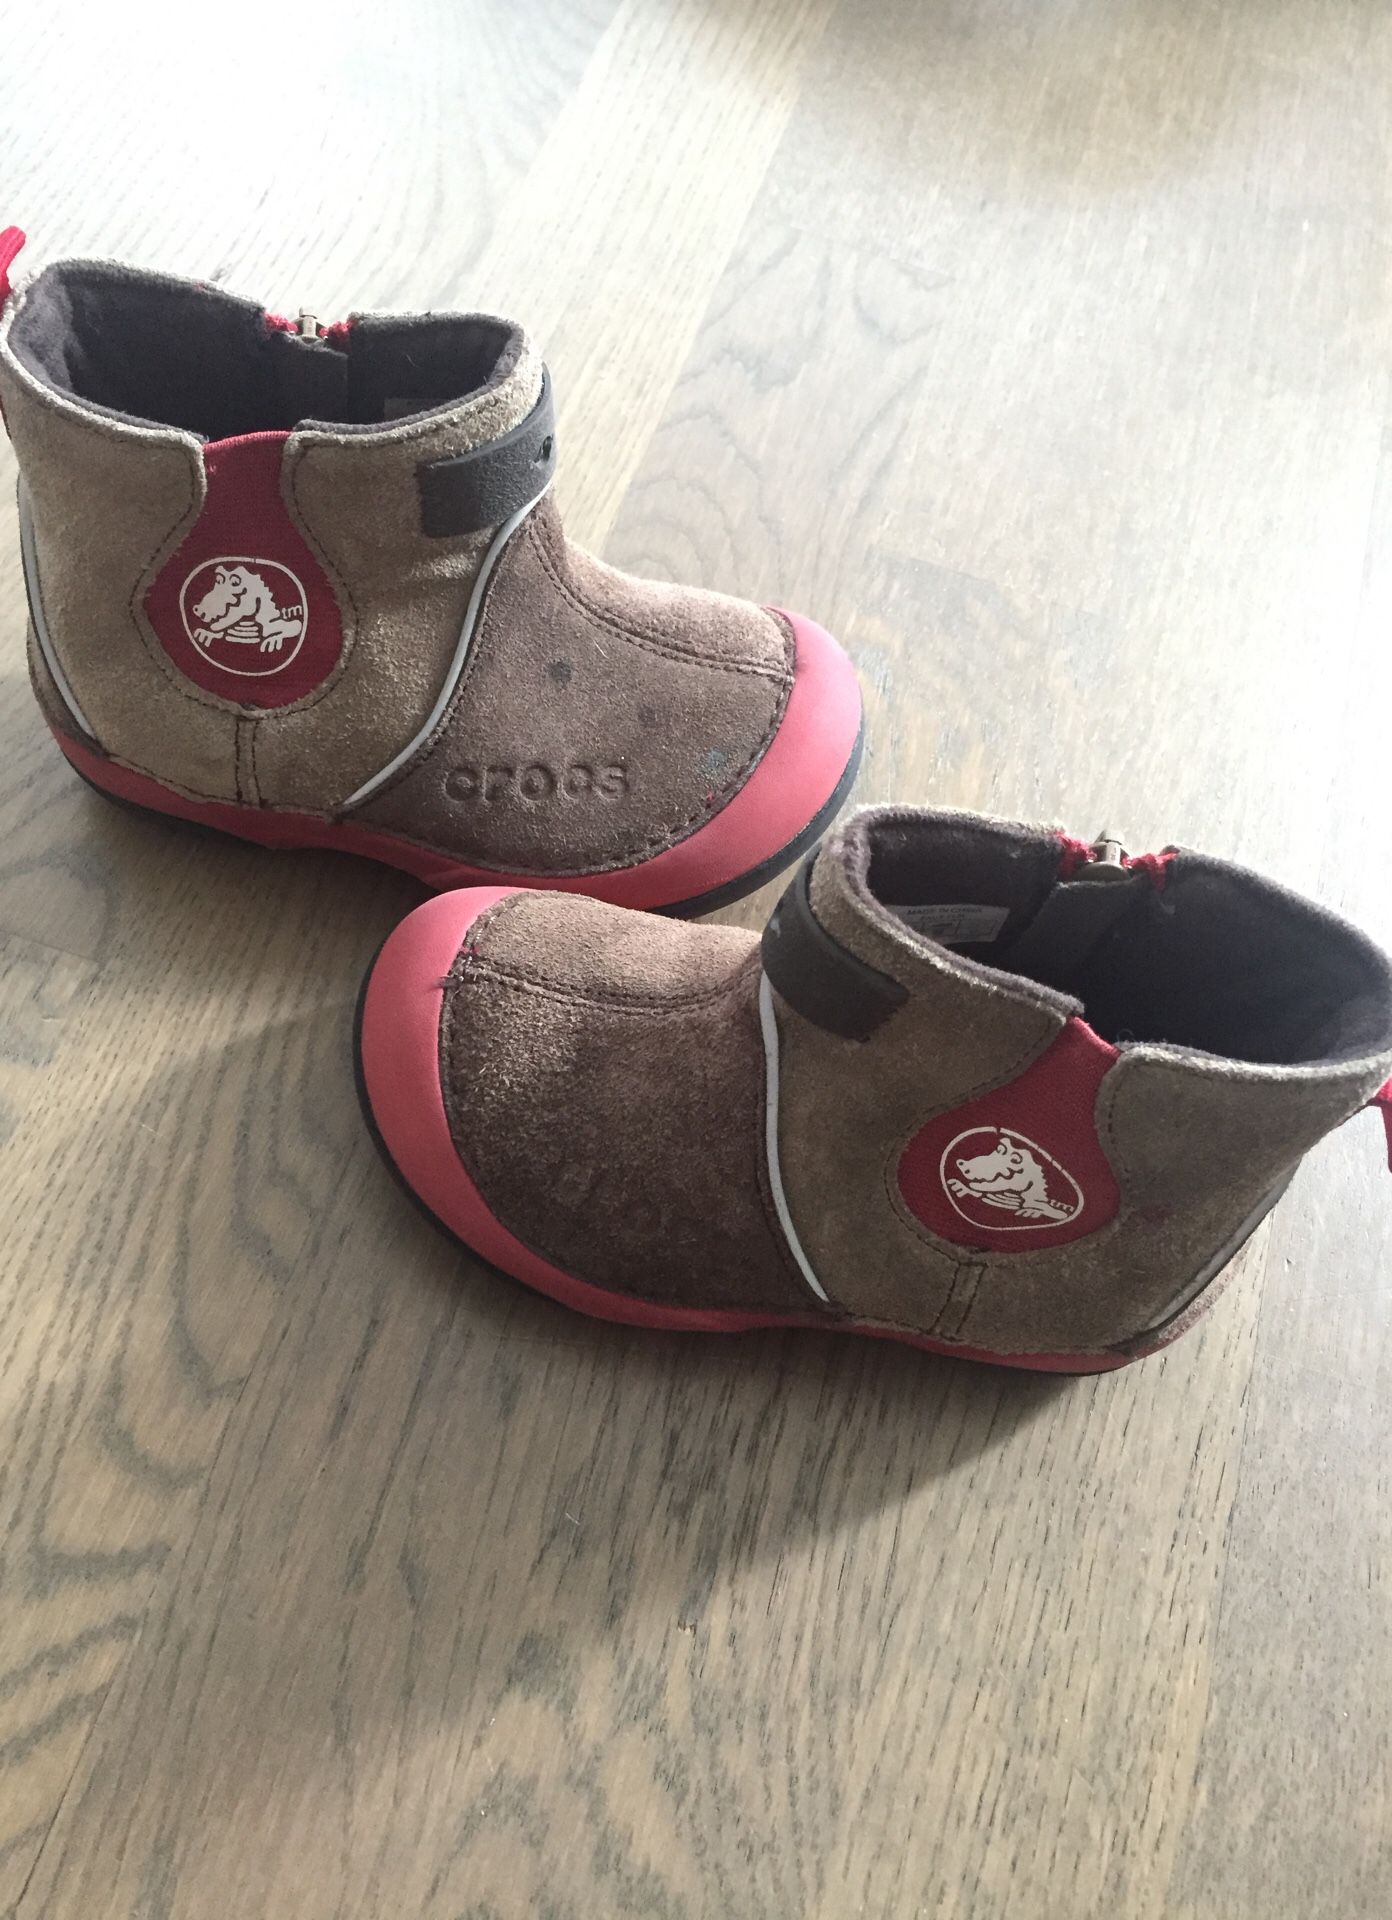 Crocs boys ankle boots fall/winter